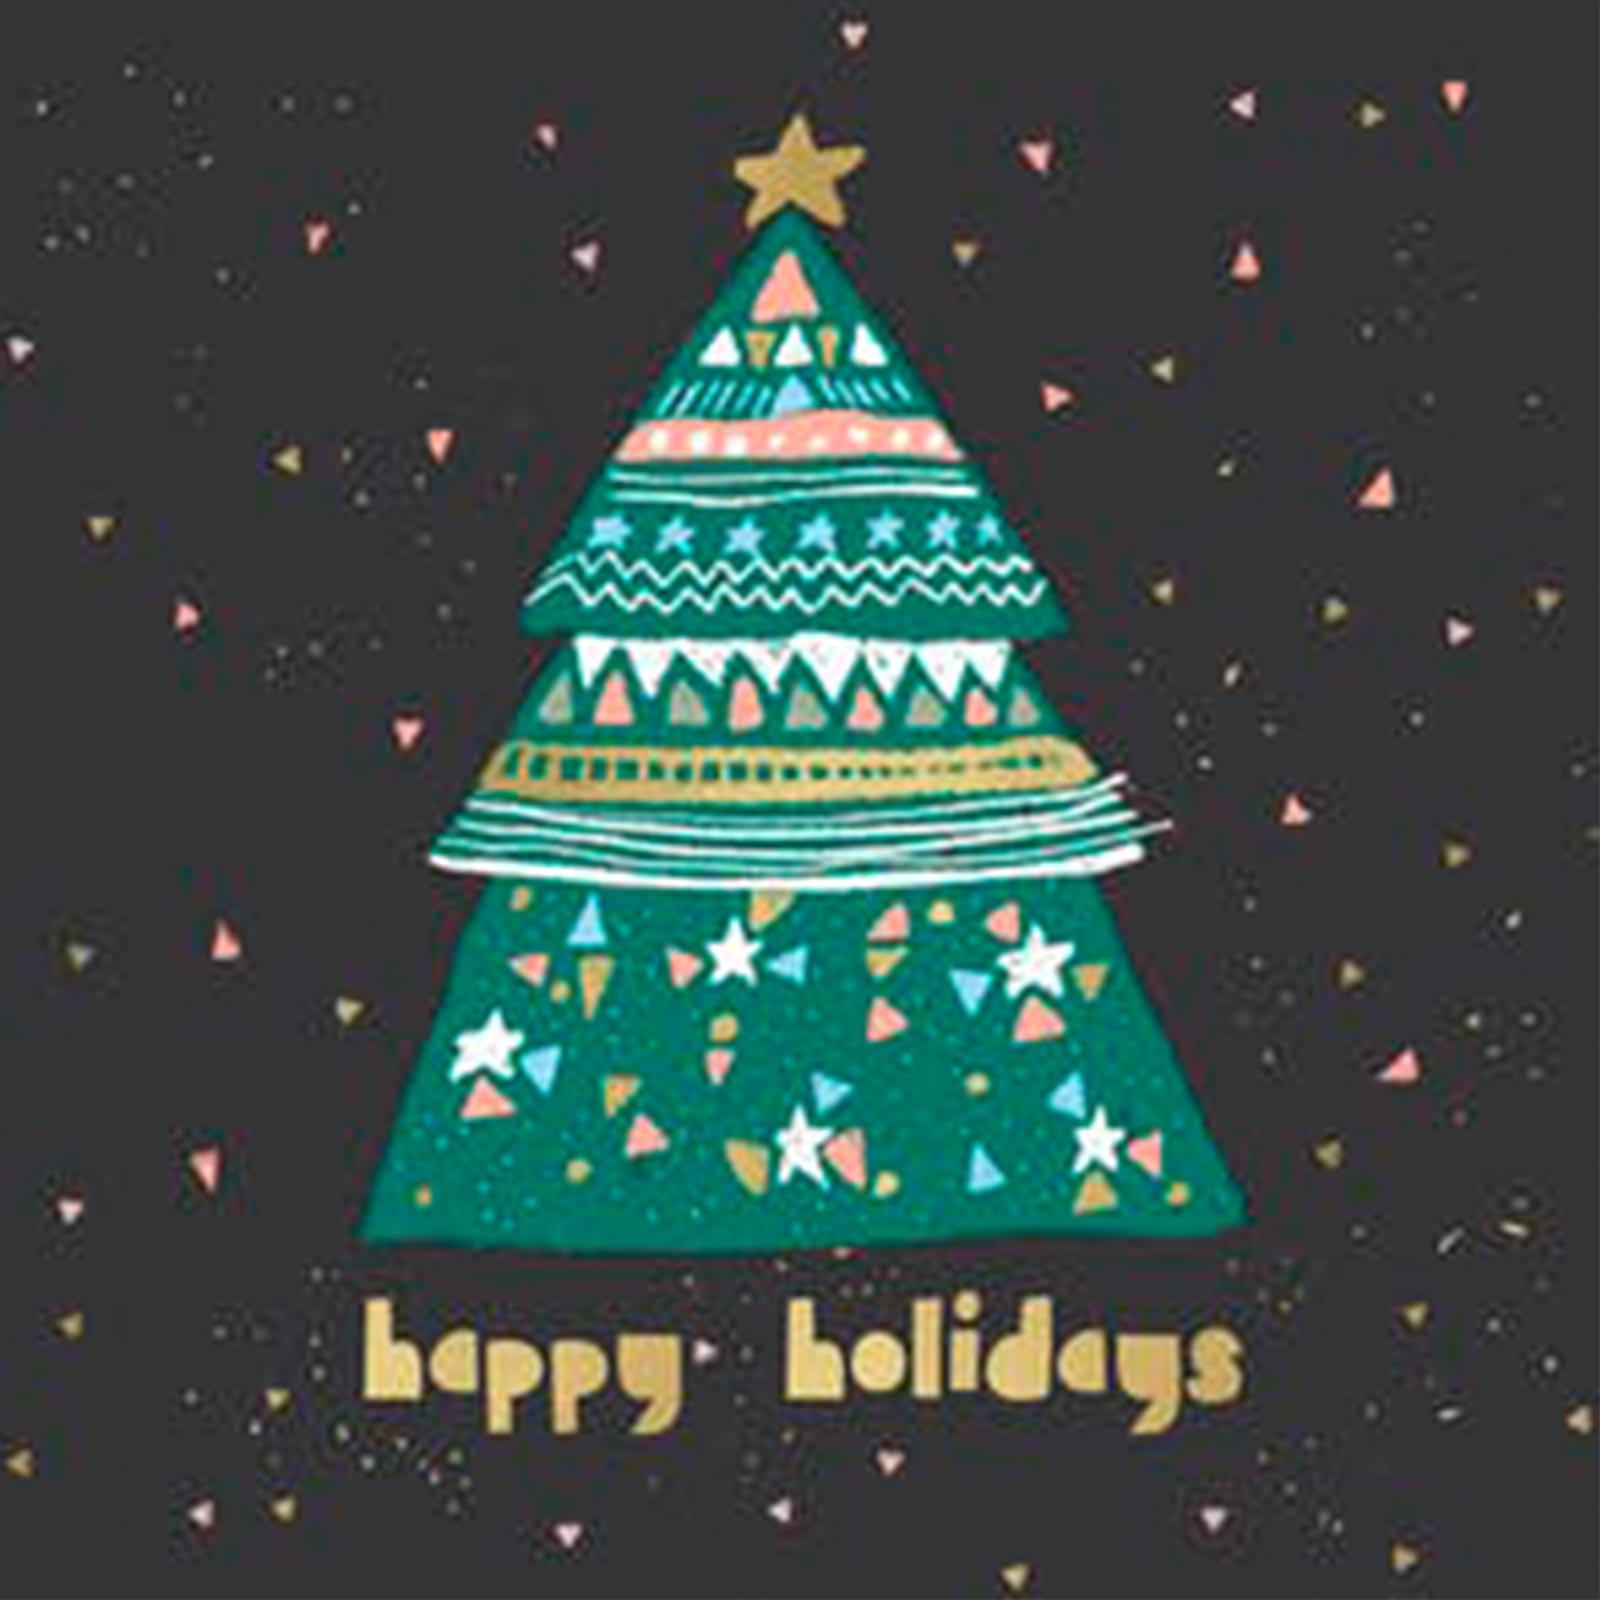 Free Christmas Cards To Print Out And Send This Year | Reader&amp;#039;s Digest - Make A Holiday Card For Free Printable